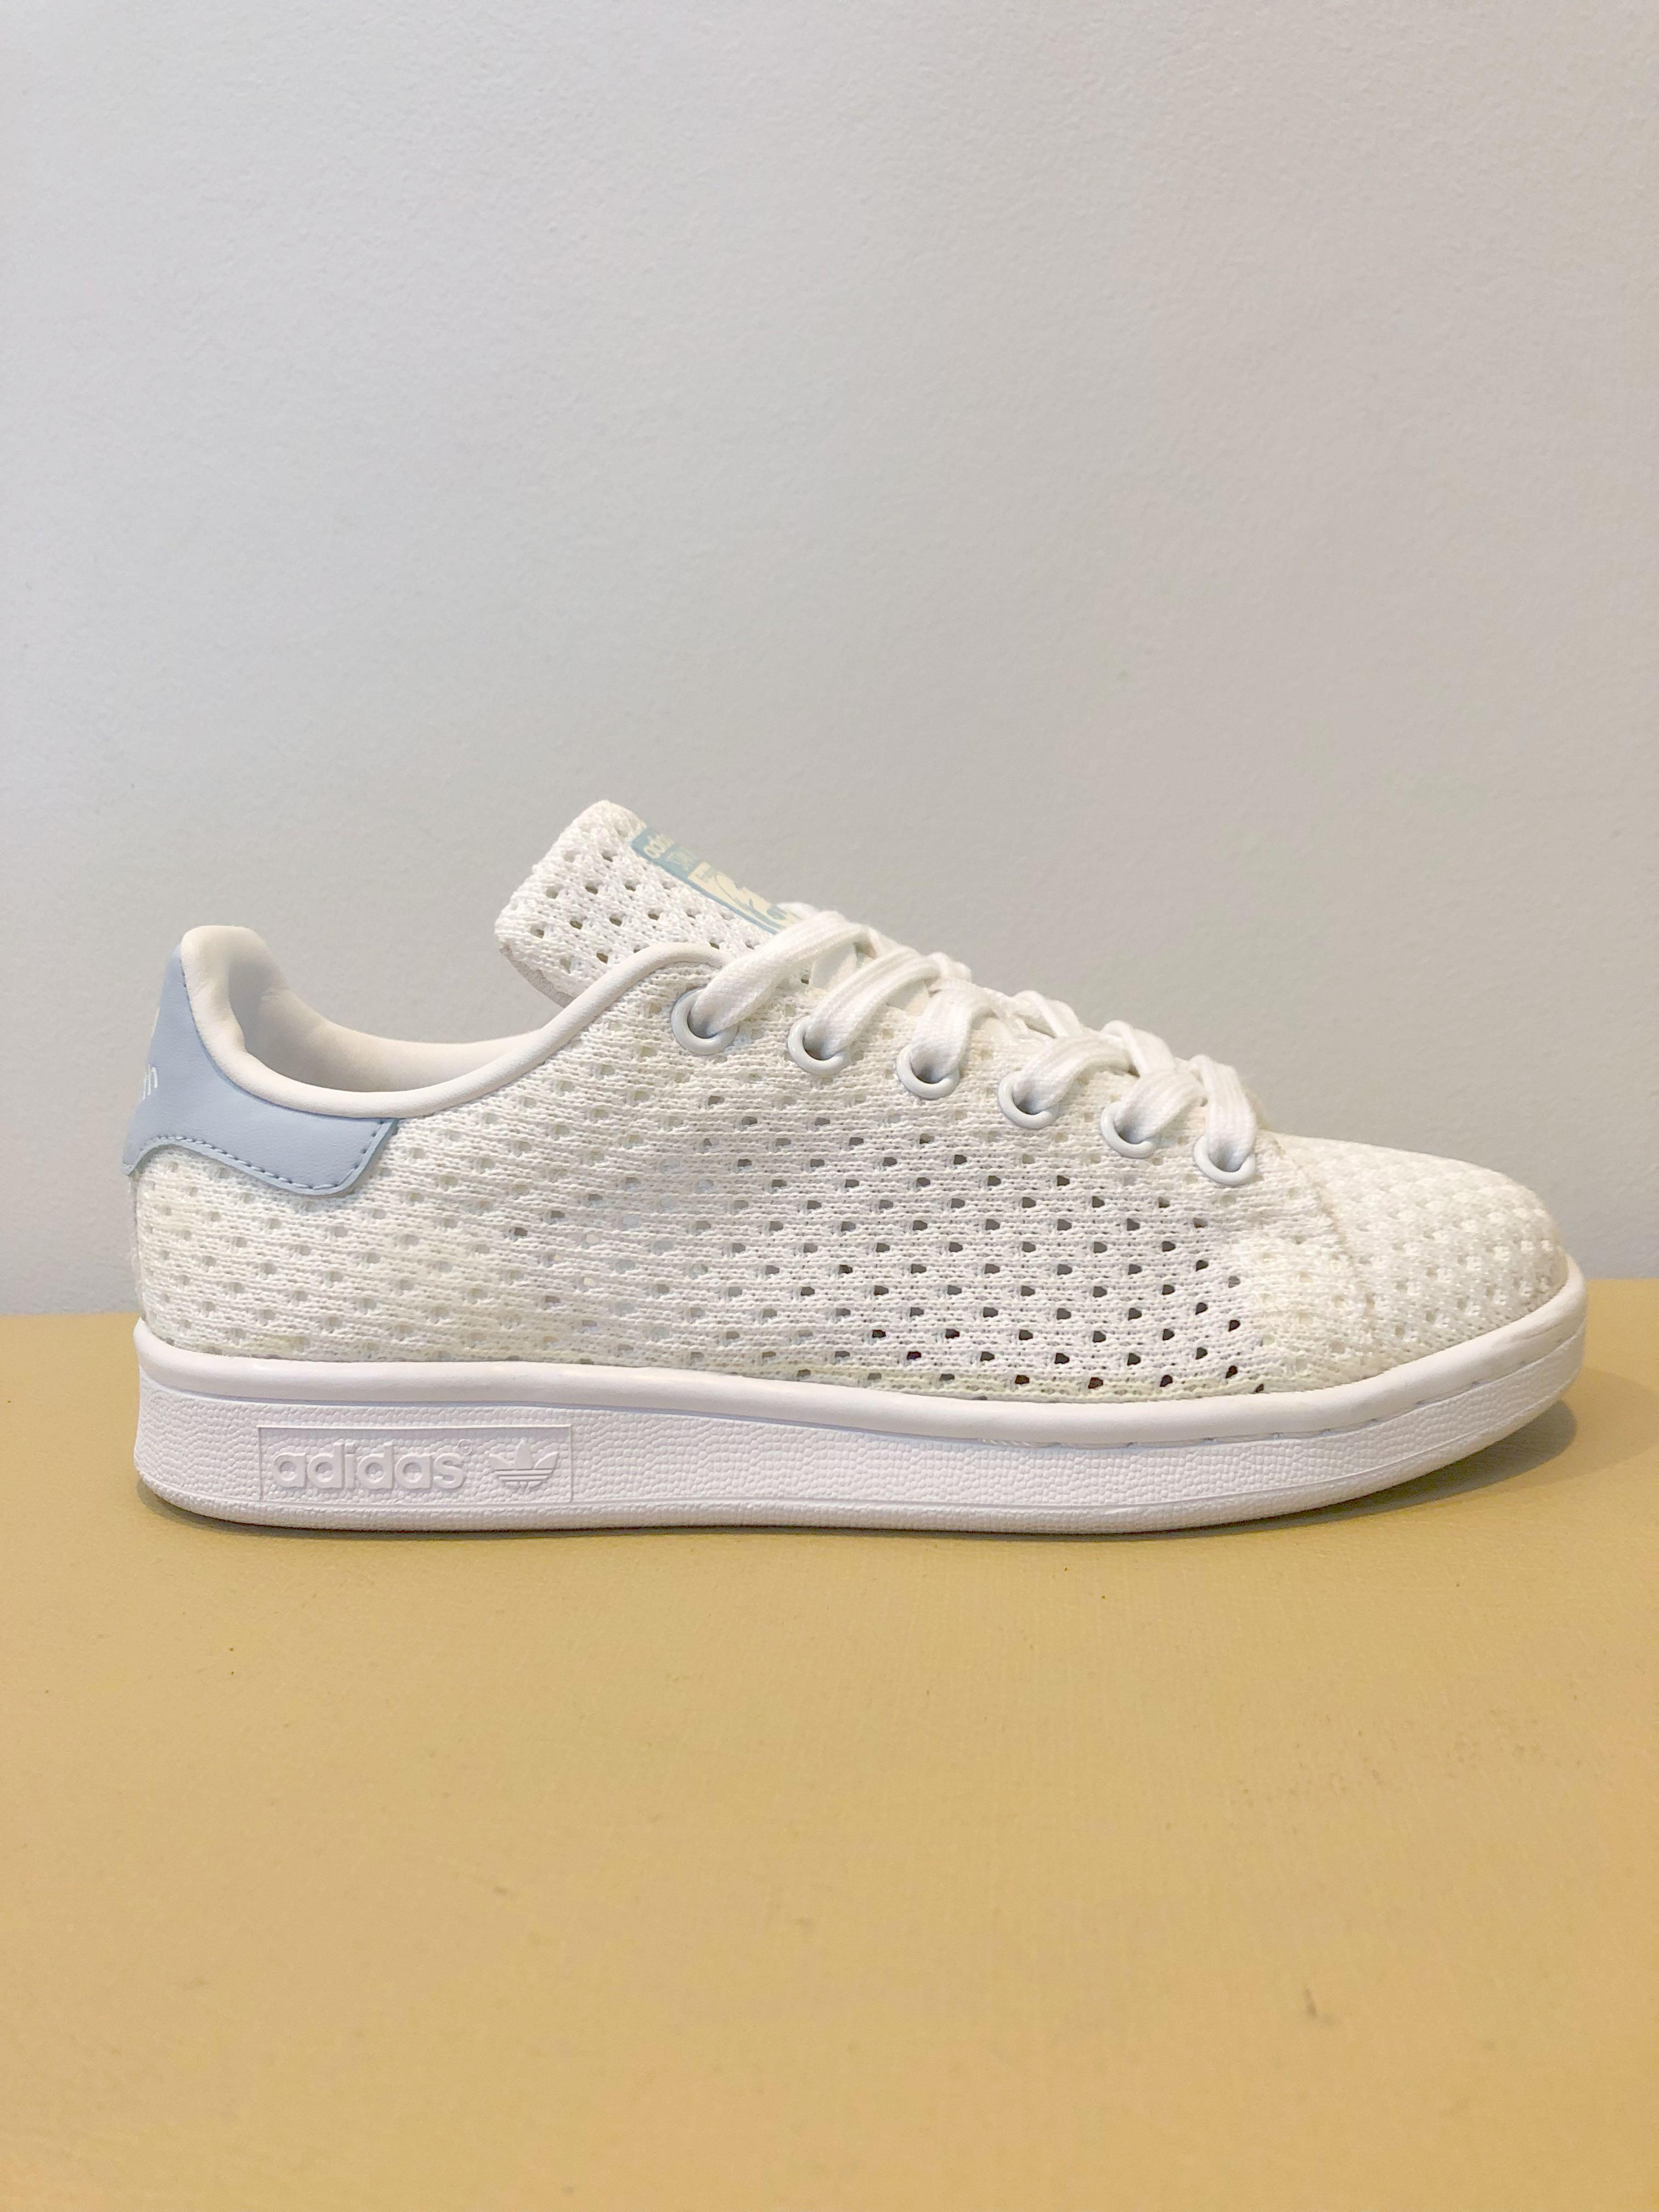 US5 Adidas Stan Smith Knit Mesh in Baby 